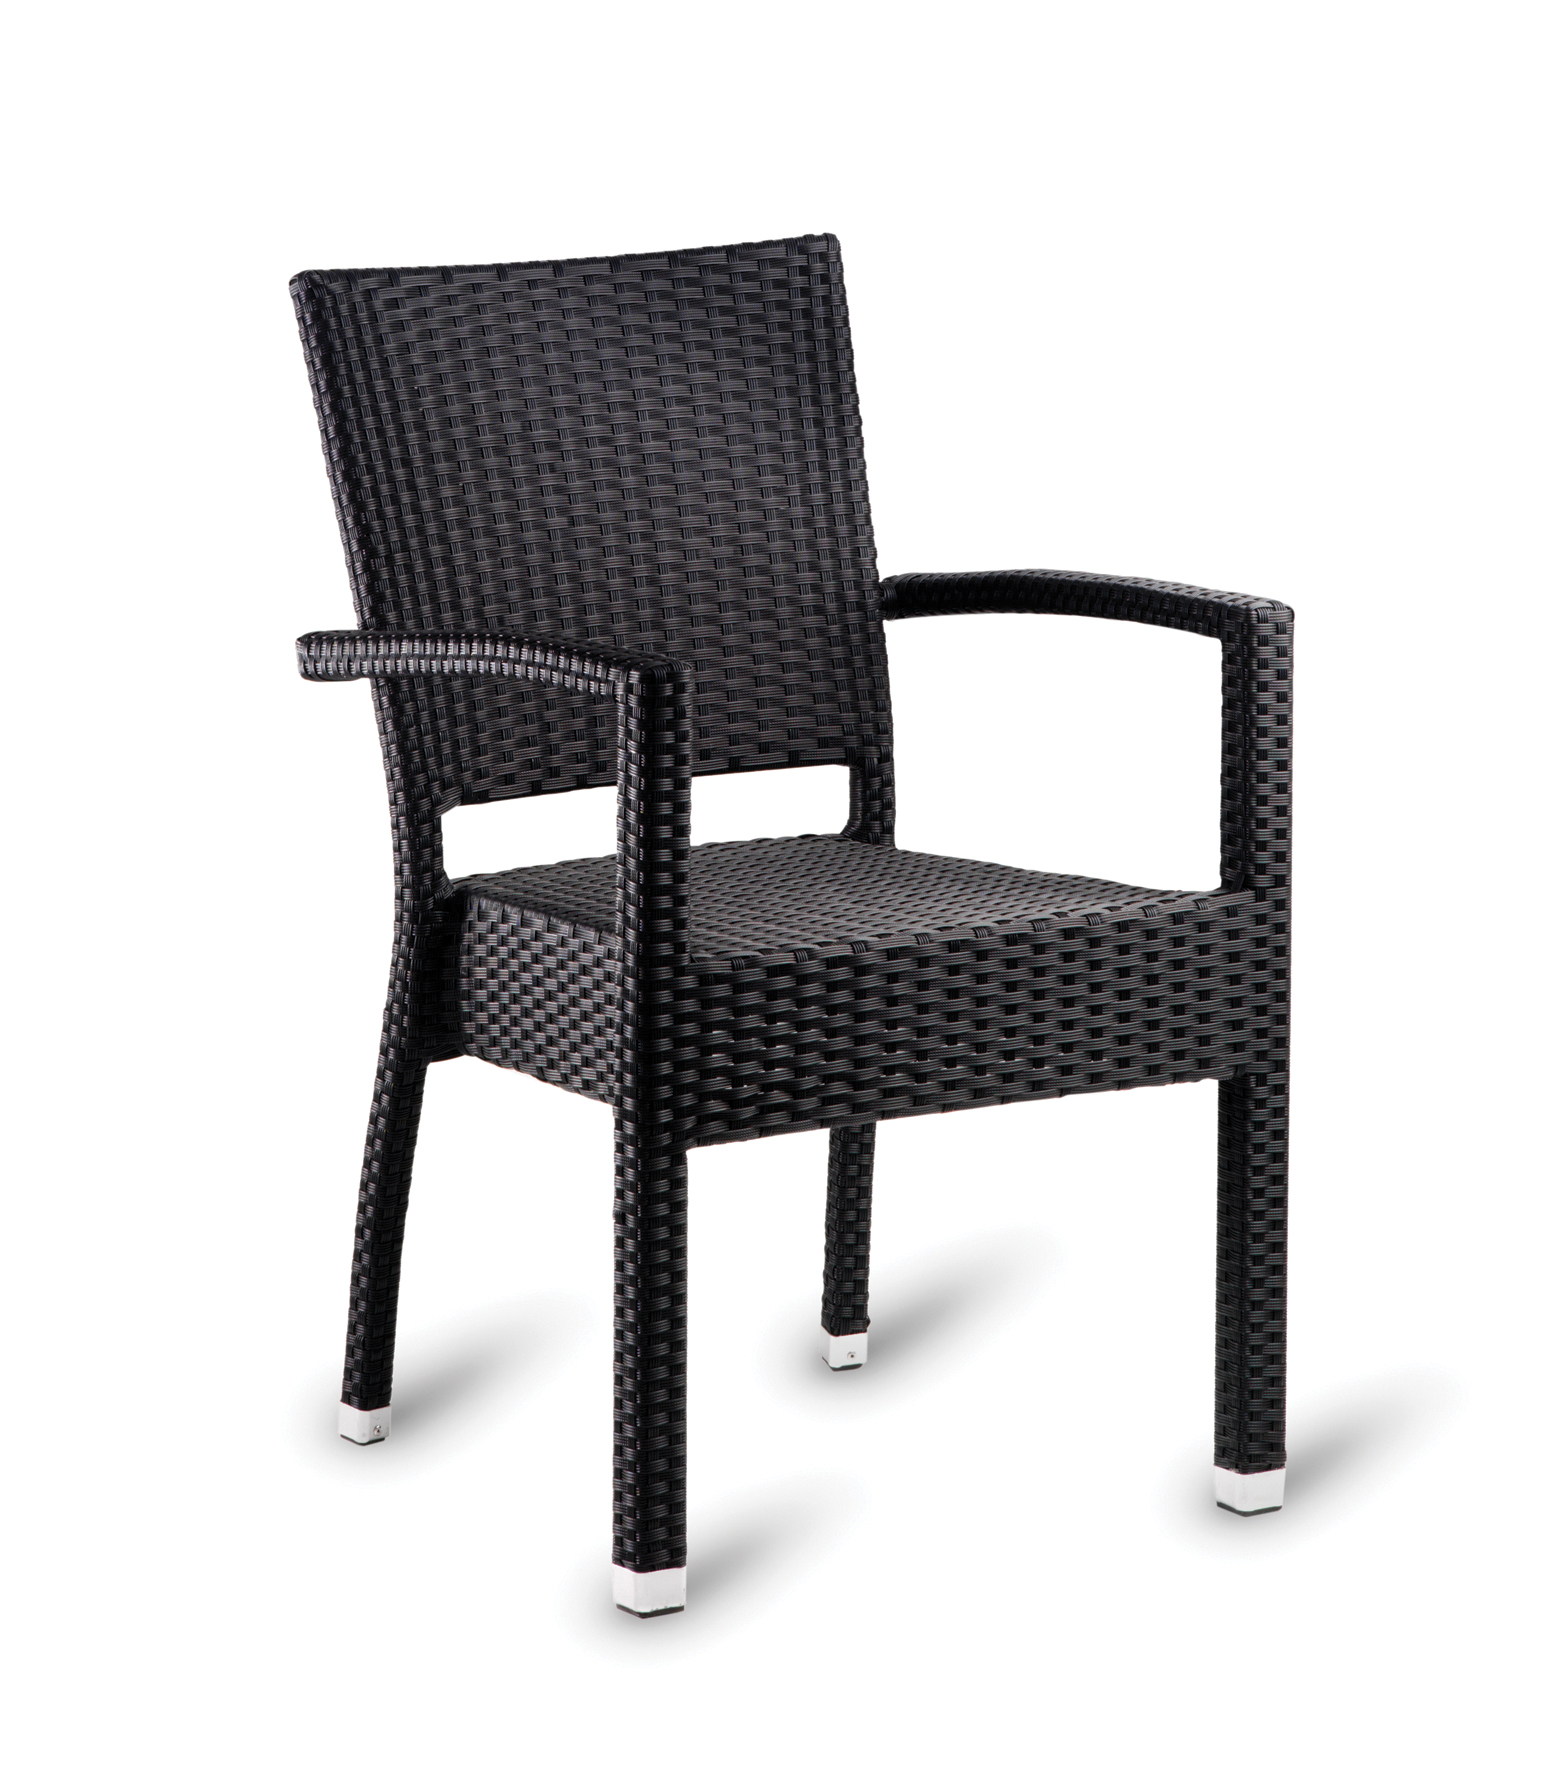 Wicker stacking arm chairs 2